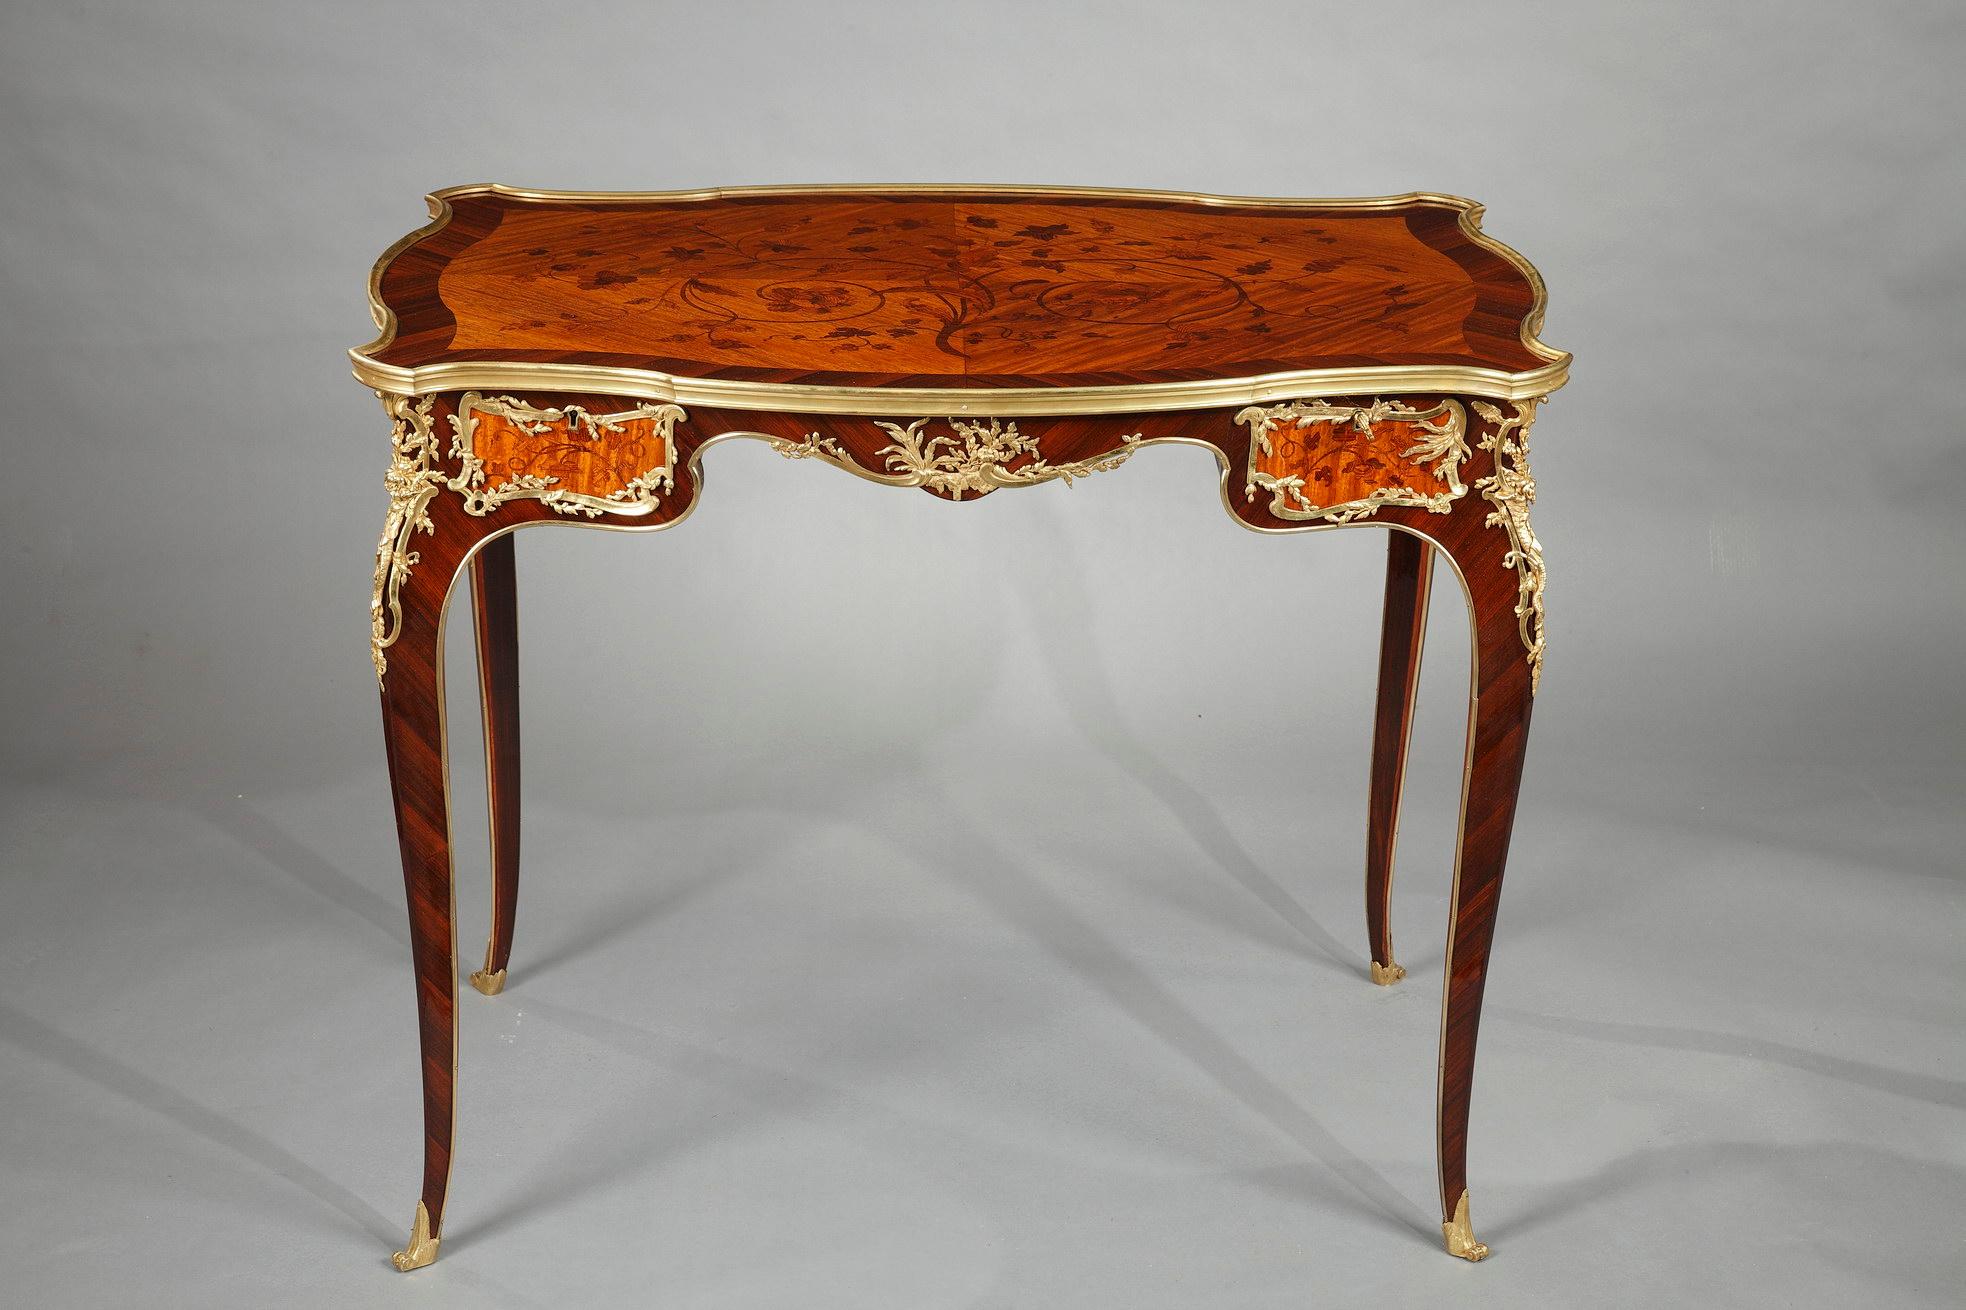 Charming veneered wood and gilded bronze Louis XV style table attributed to J.E. Zwiener, with an elegant 